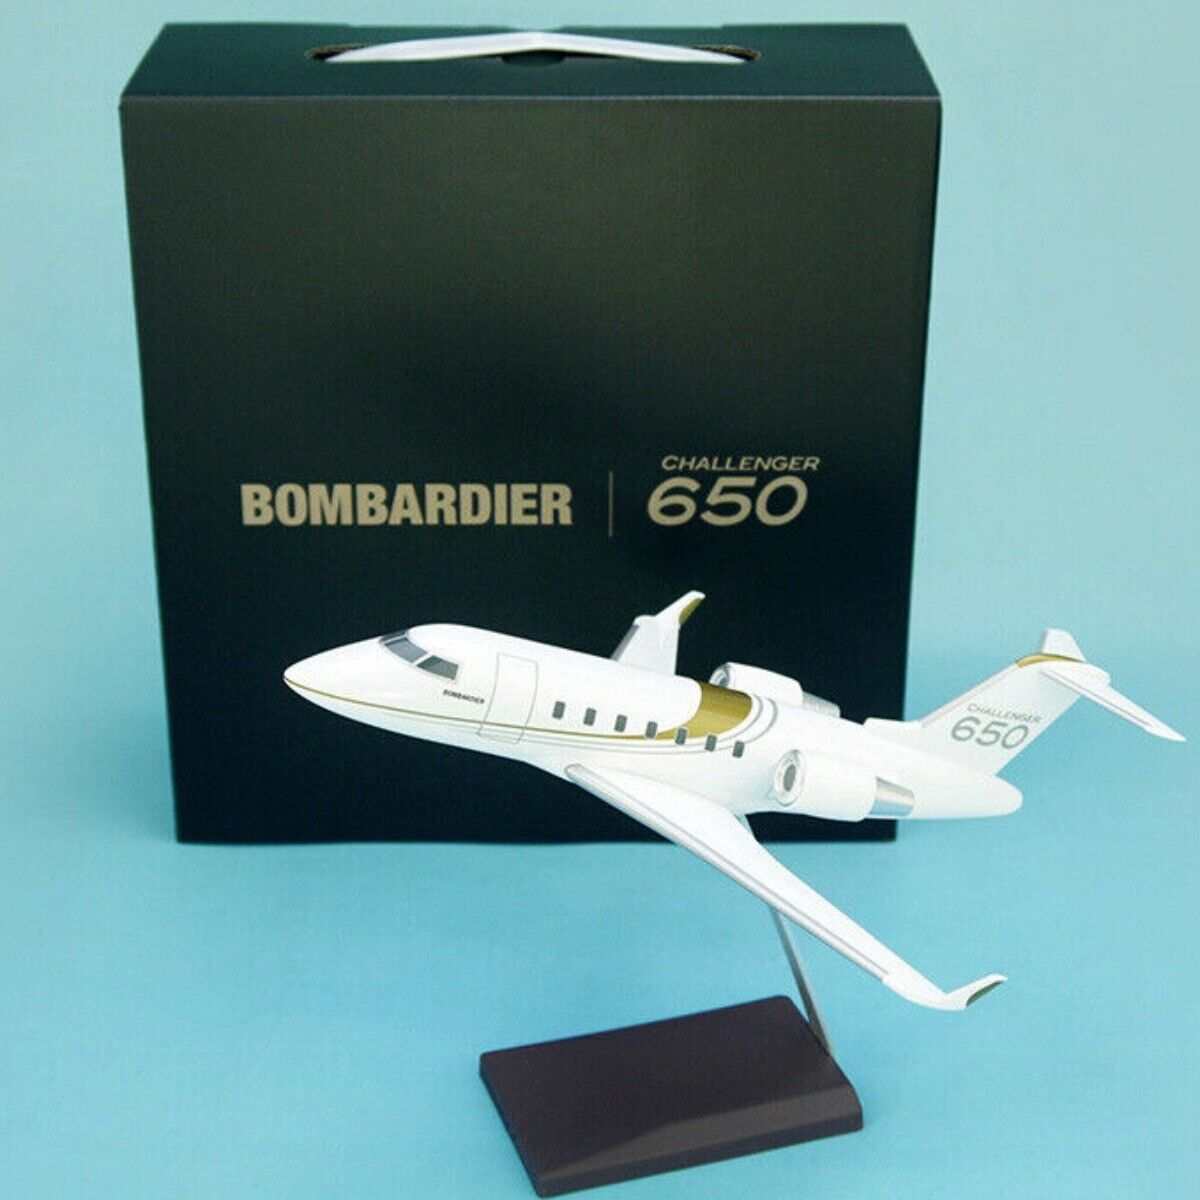 1/100 Bombardier Challenger 650 Corporate Aircraft Jet Model 21cm/8inches